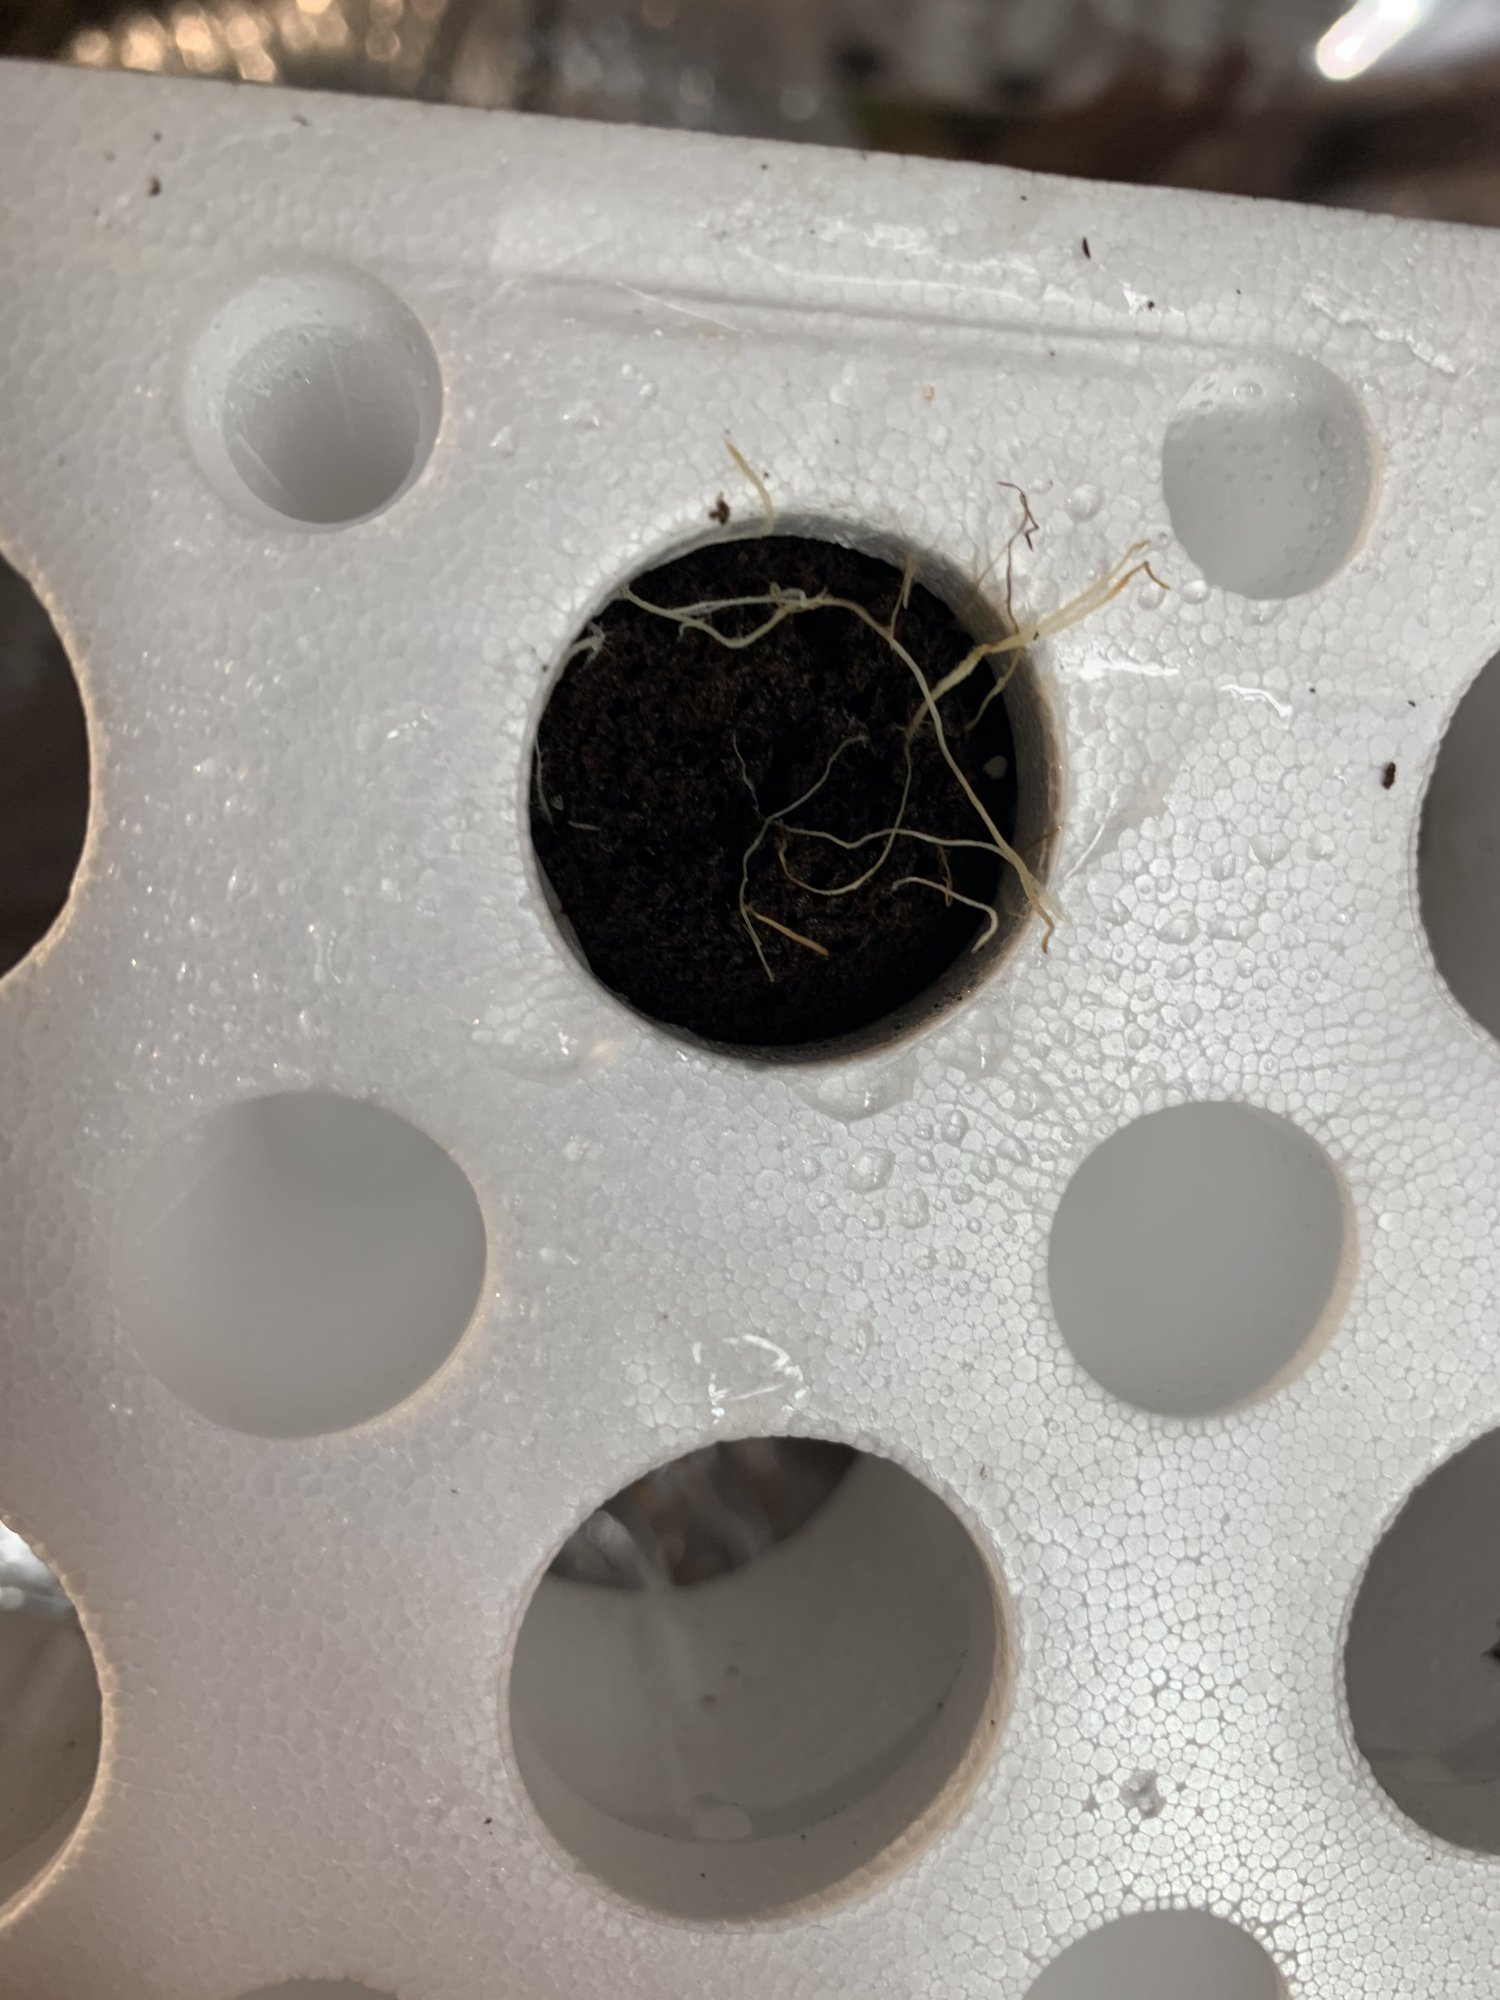 Whats wrong with my seedlings 6